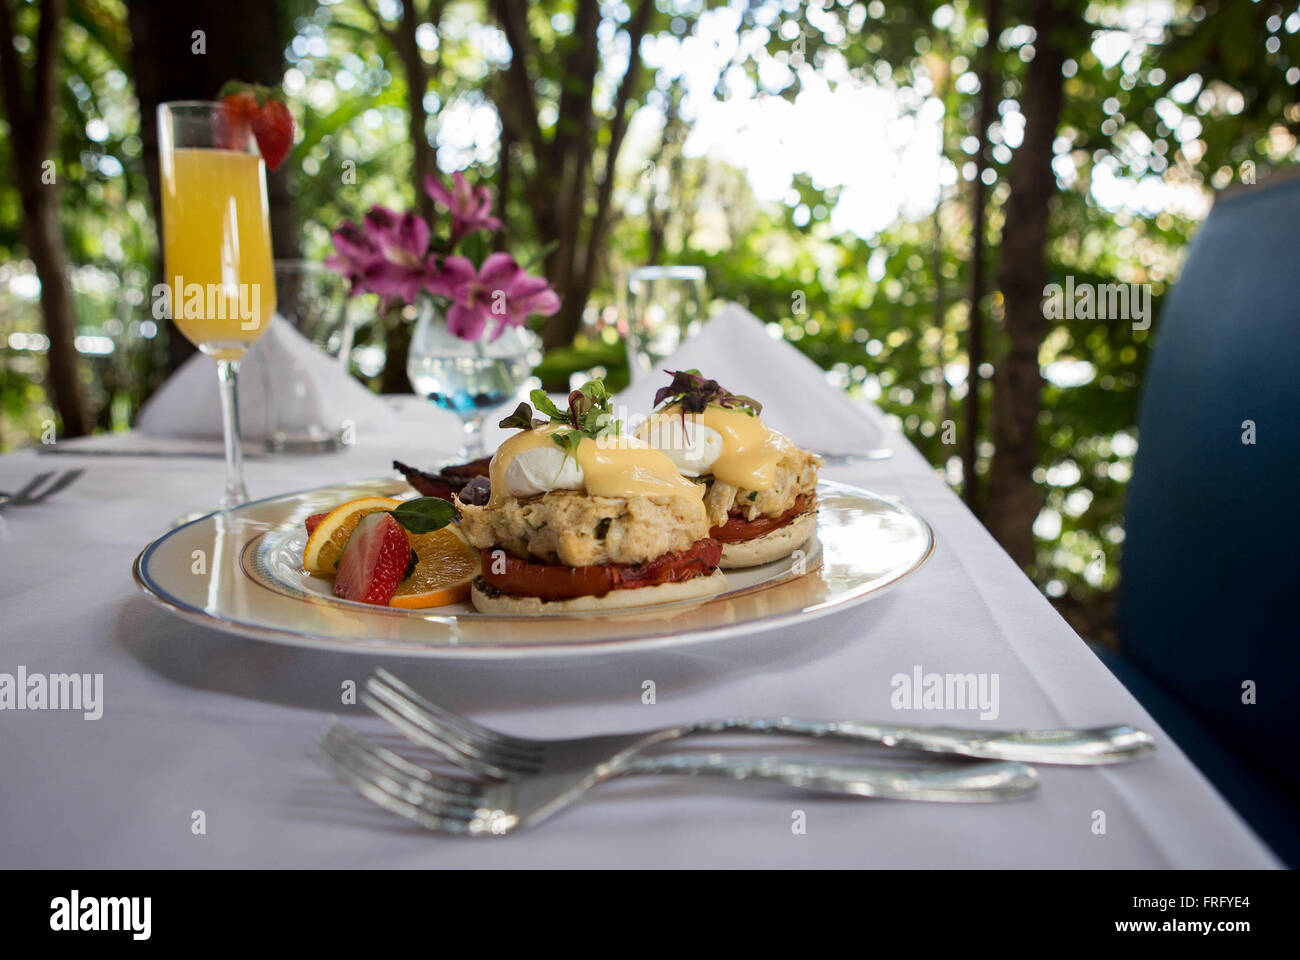 West Palm Beach, Florida, USA. 22nd Mar, 2016. Ocean Bleu Eggs Benedict, crab, grilled heirloom tomatoes, and tricolor potato medley, with a side of Millionaires Bacon. Ocean Bleu was voted best brunch spot in Palm Beach County by Palm Beach Post readers. © Allen Eyestone/The Palm Beach Post/ZUMA Wire/Alamy Live News Stock Photo